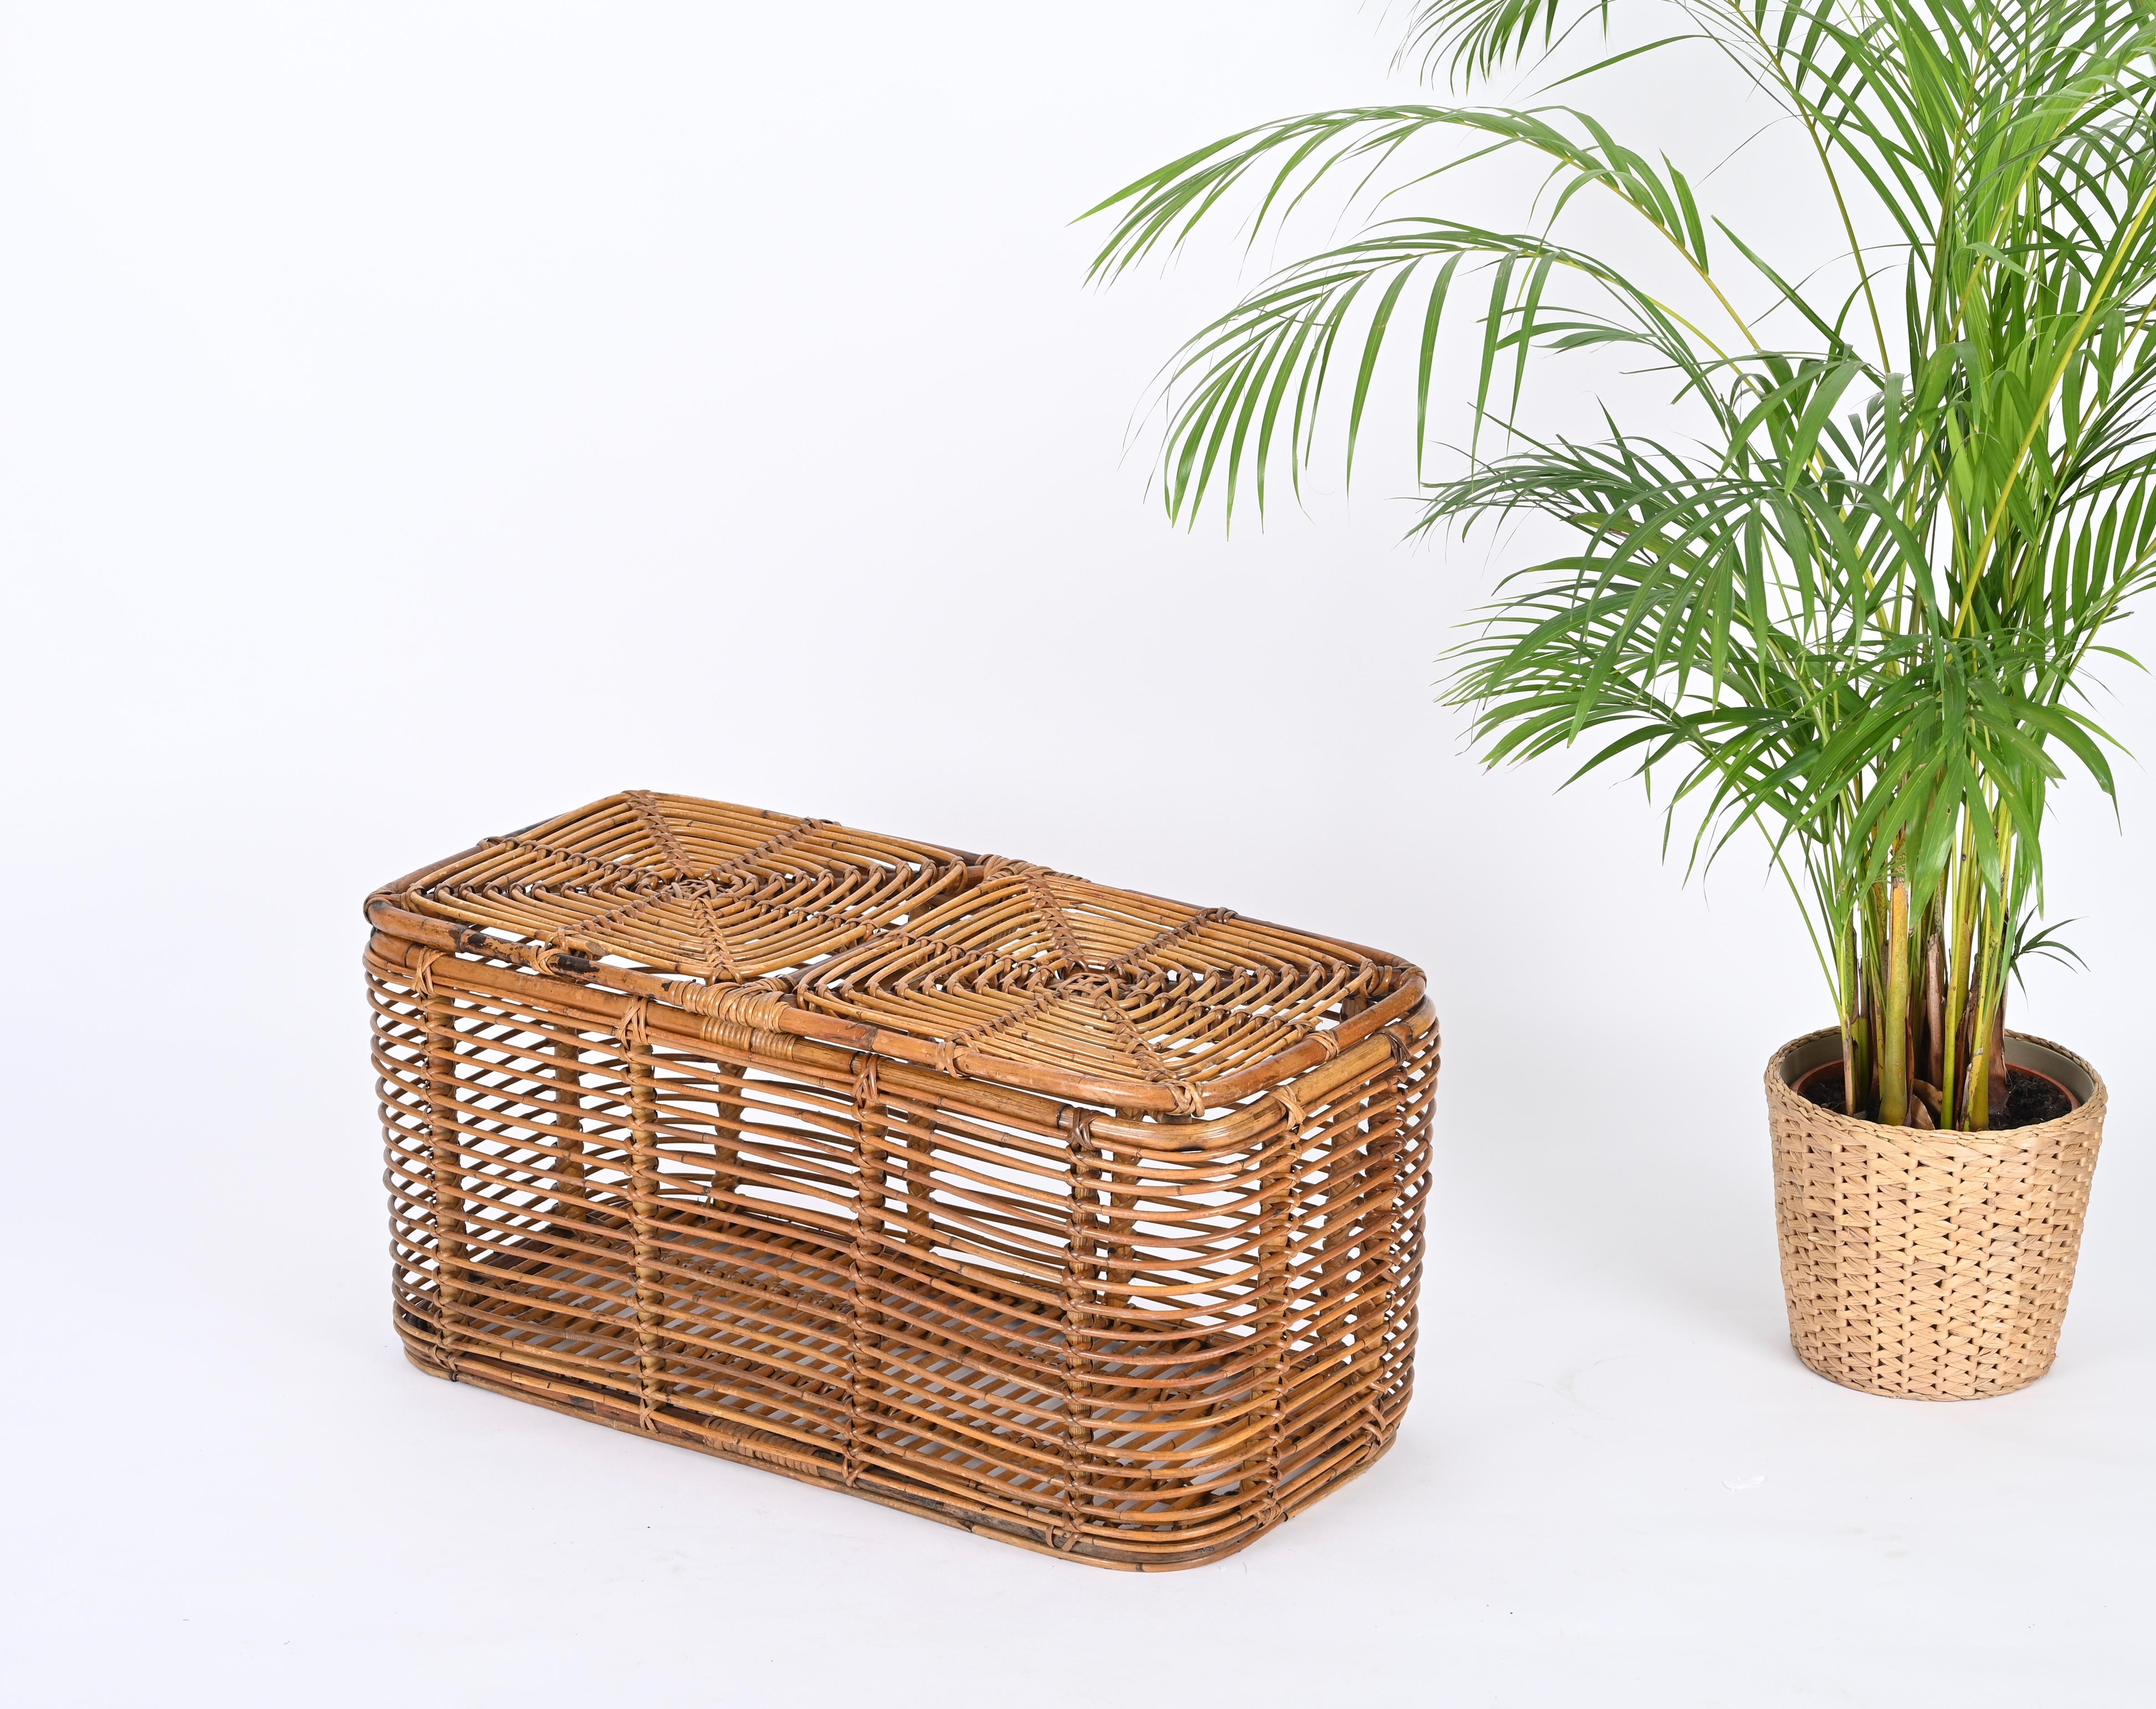 Gorgeous Mid-Century decorative rectangular basket in bamboo and rattan wicker. This lovely item was produced in Italy during the 1960s. 

Fully hand-crafted, this storage basket is made in a wonderful combination of curved bamboo, rattan and woven